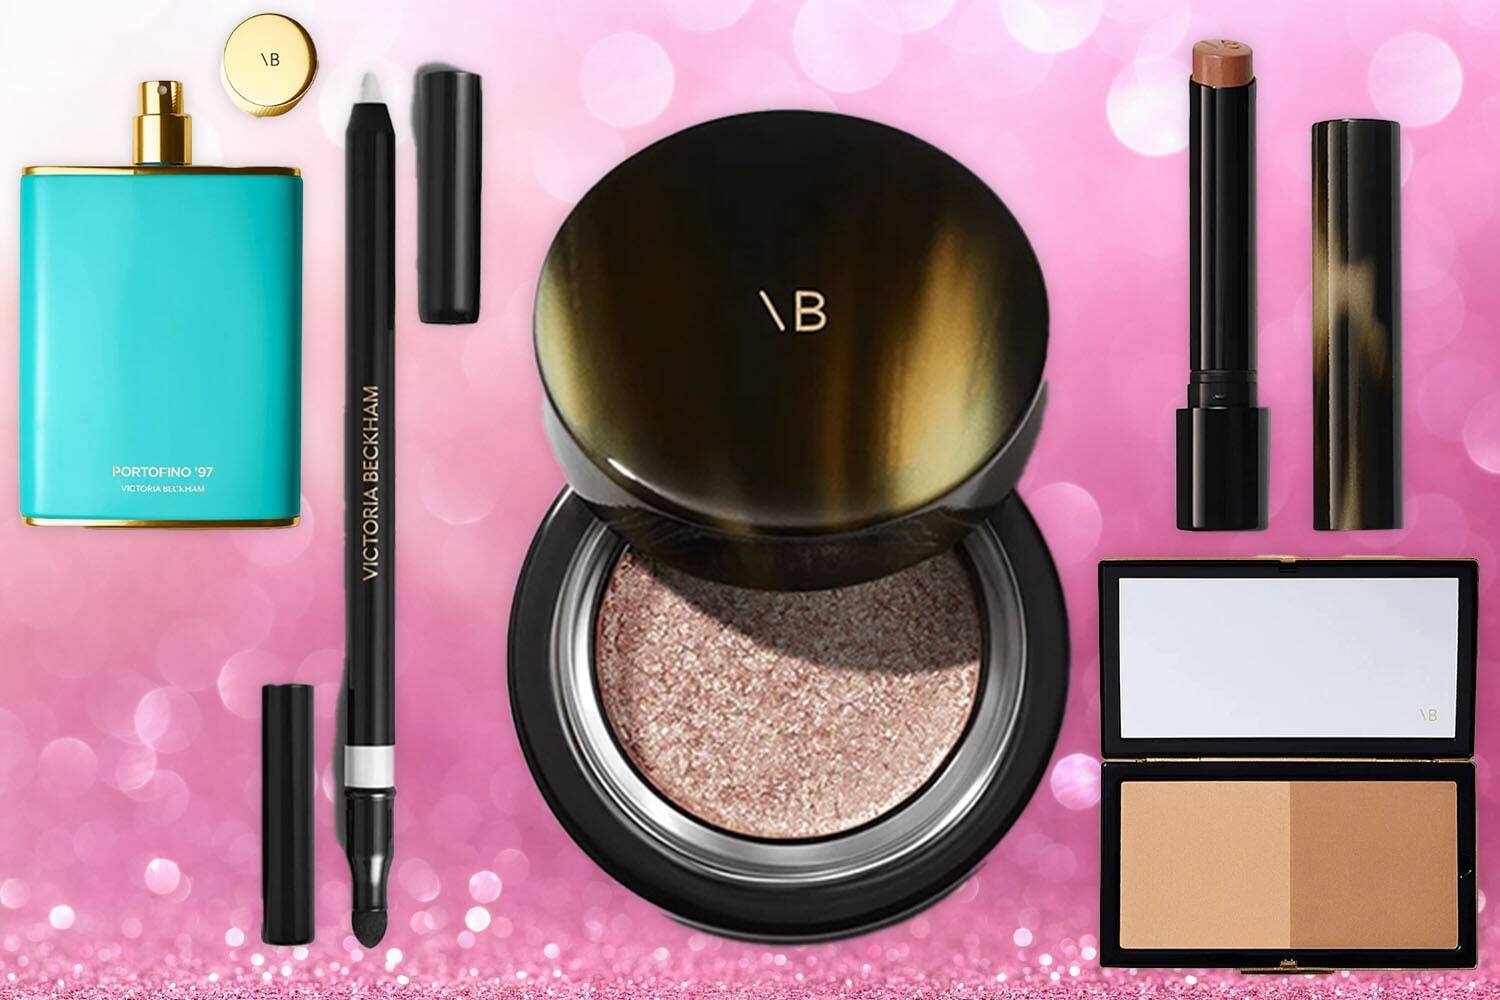 Where to buy Victoria Beckham makeup uk; Plus the five most raved about products including Kajal Liner & Lid Lustre